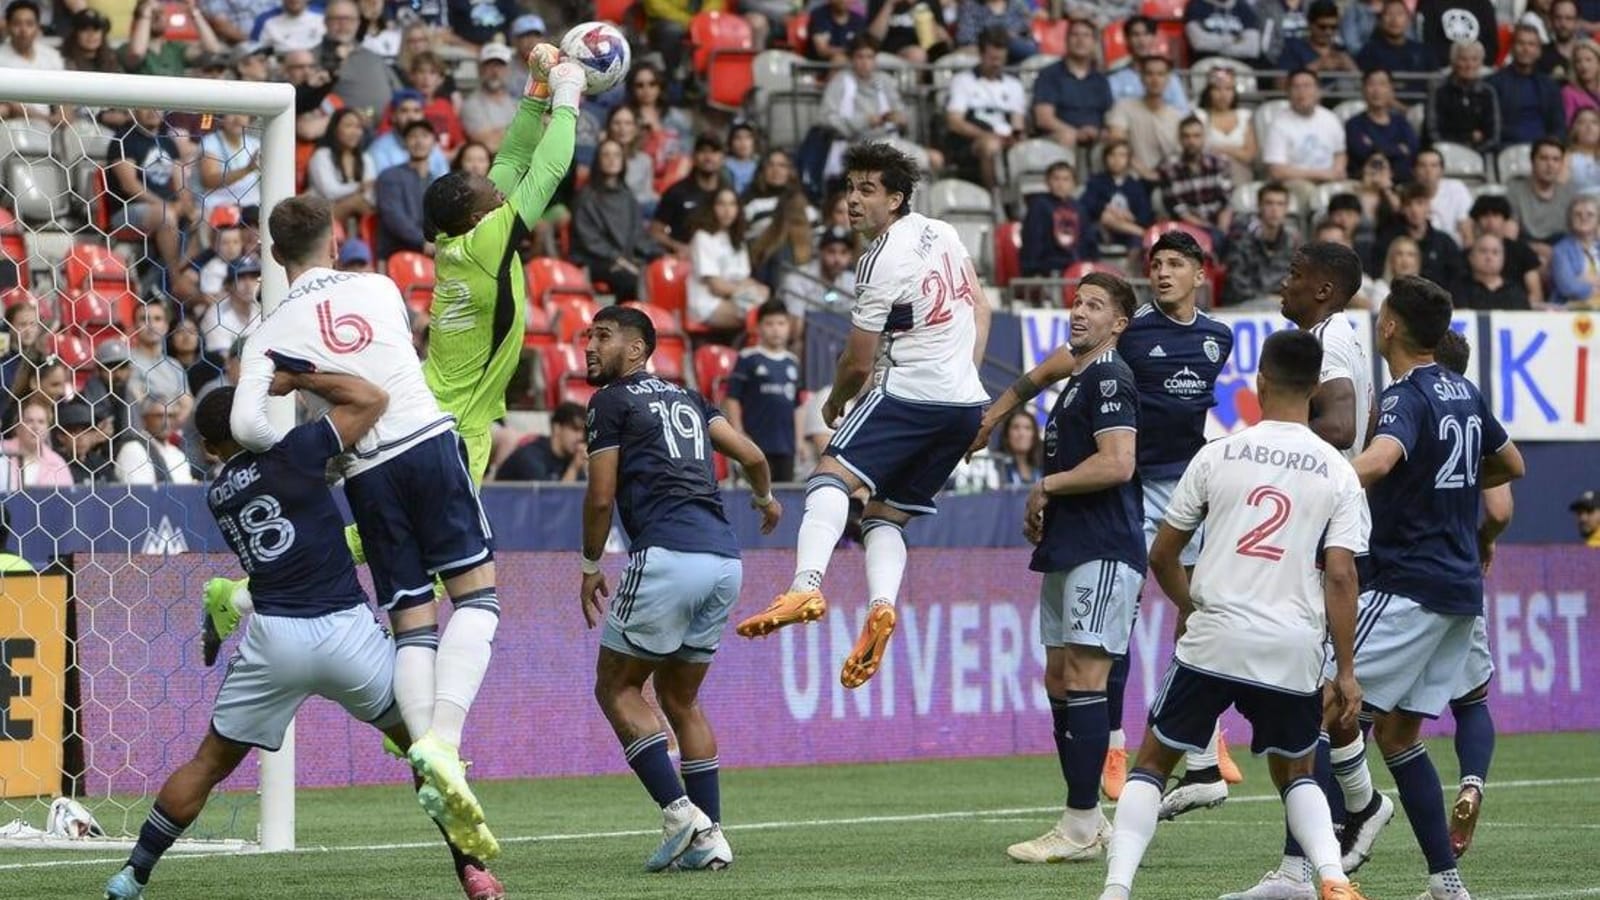 Sporting KC earn draw with Whitecaps on late penalty kick